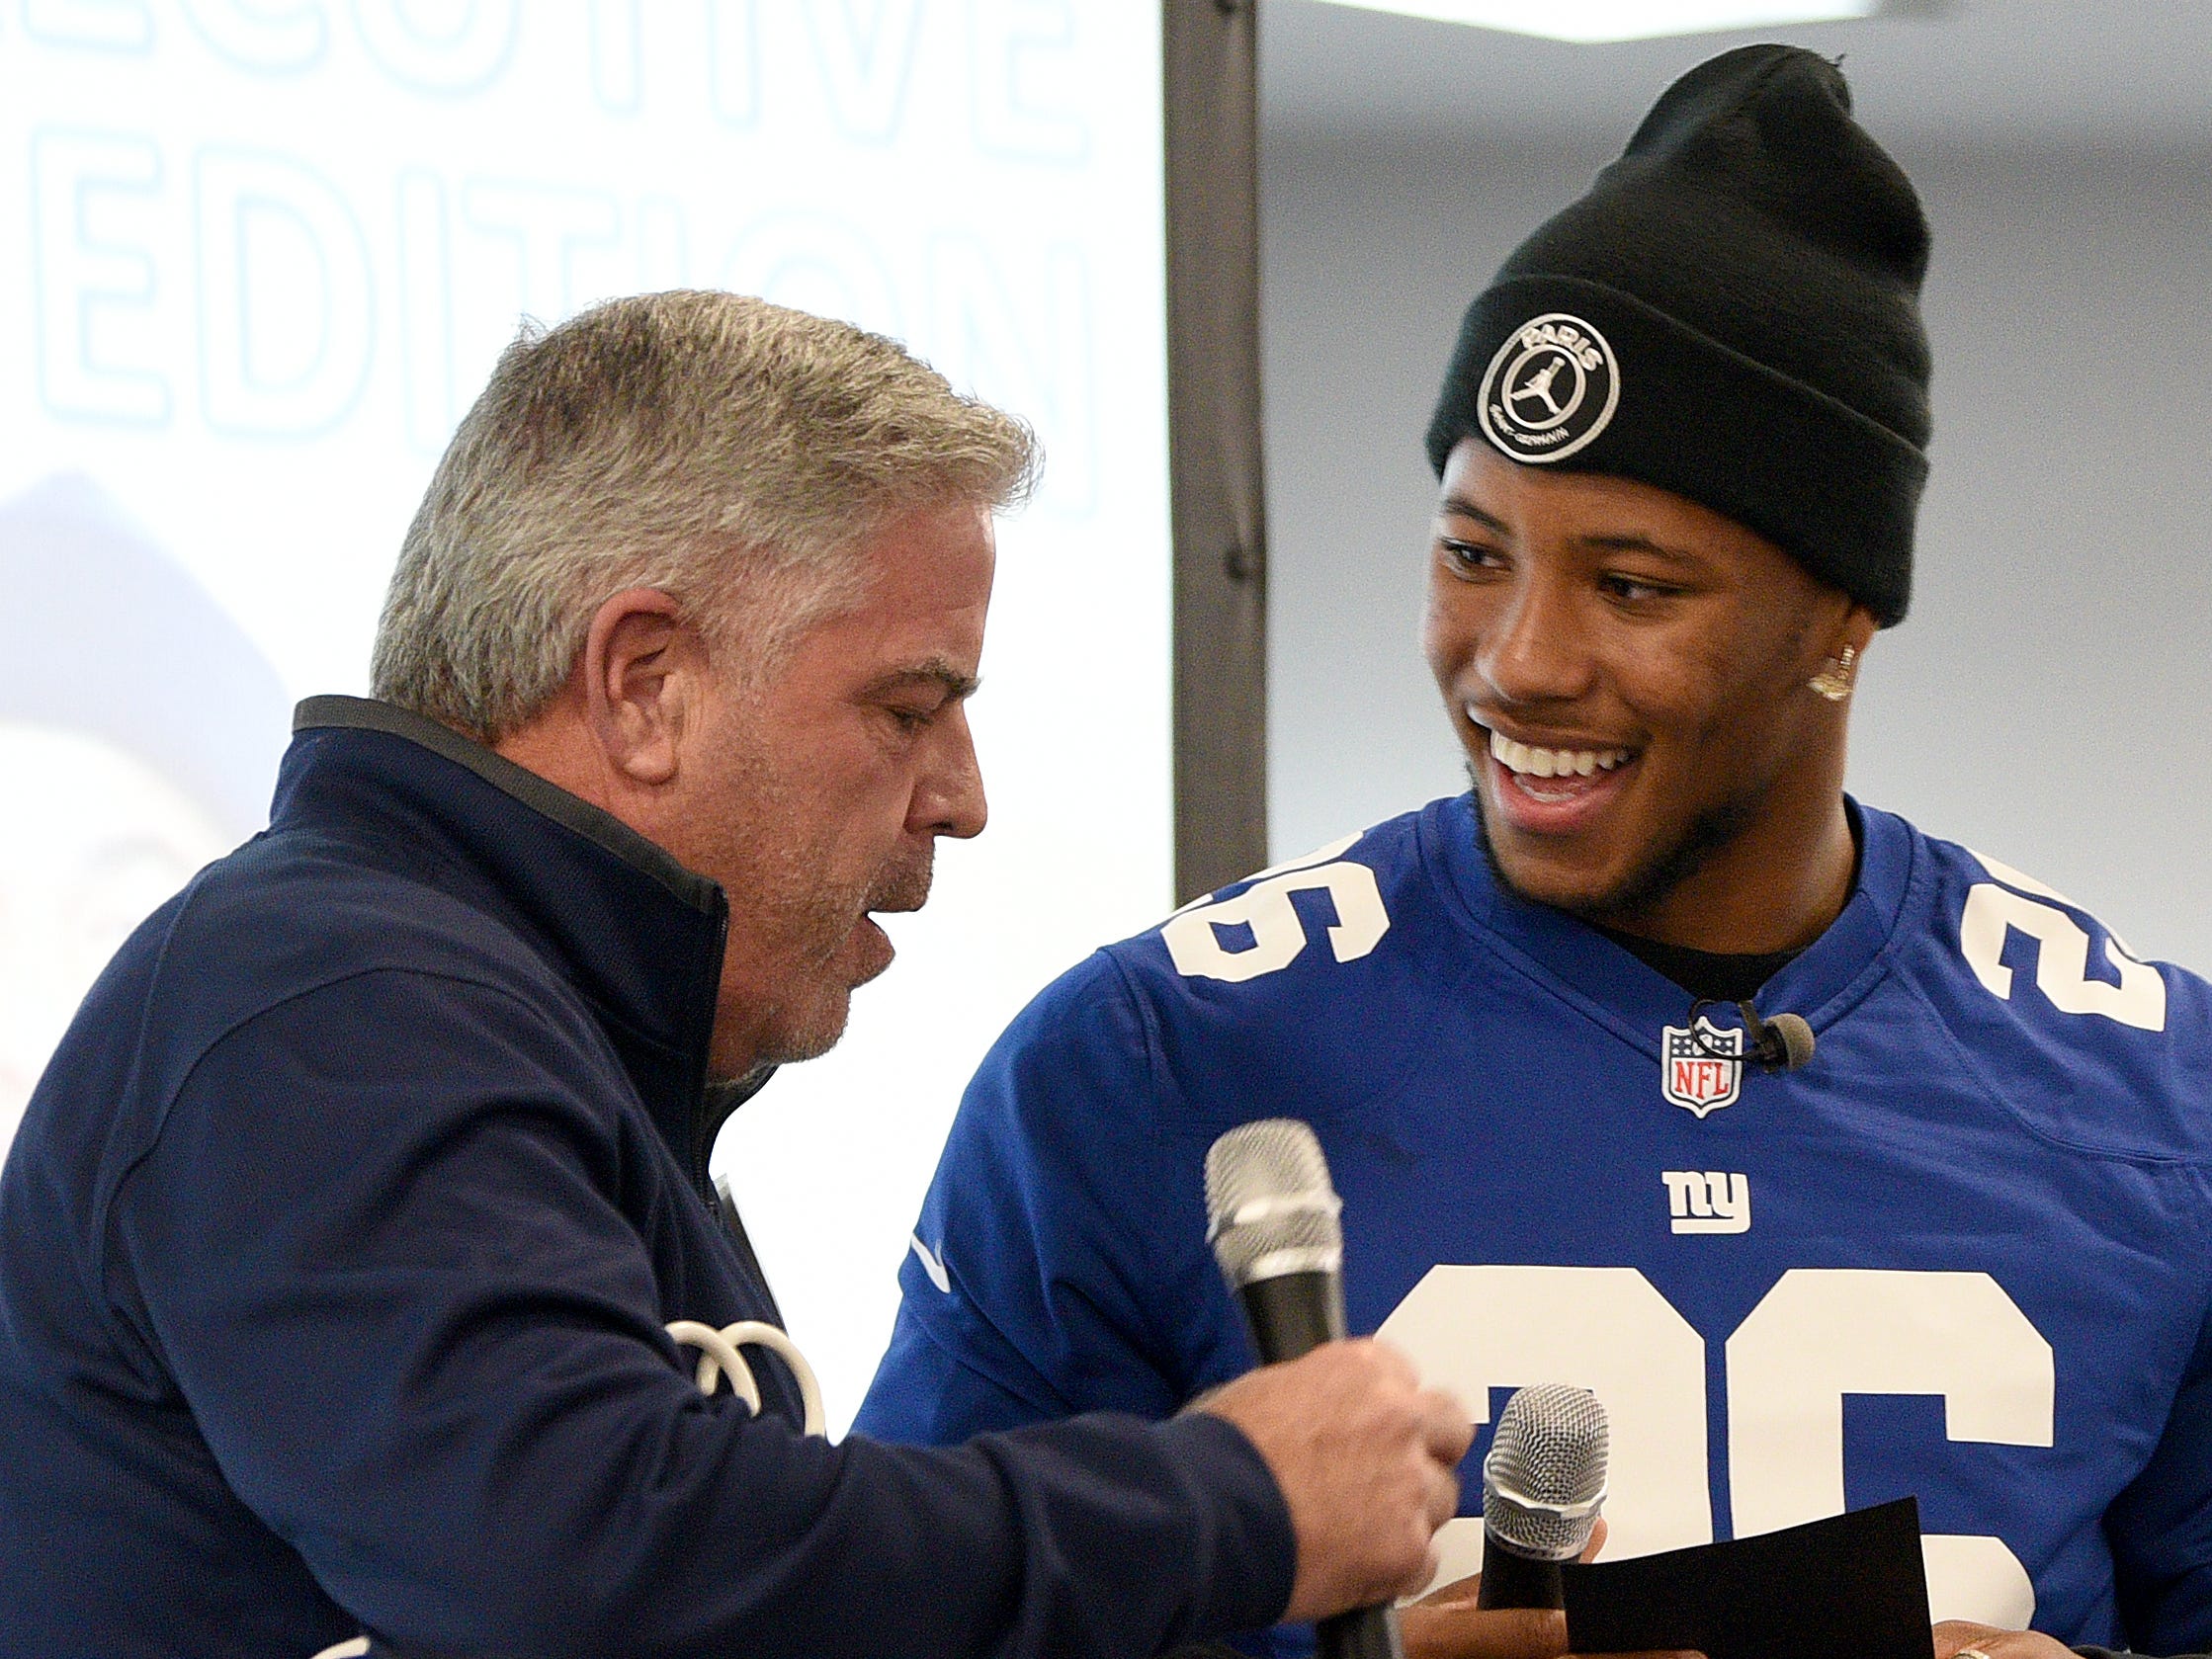 Covenant House holds a Sleep Out Executive Edition in Newark on Thursday November 21, 2019. Jim White and Saquon Barkley a player with the Giants and Sleep Out: Executive Edition Chairman speak to the fundraisers. 